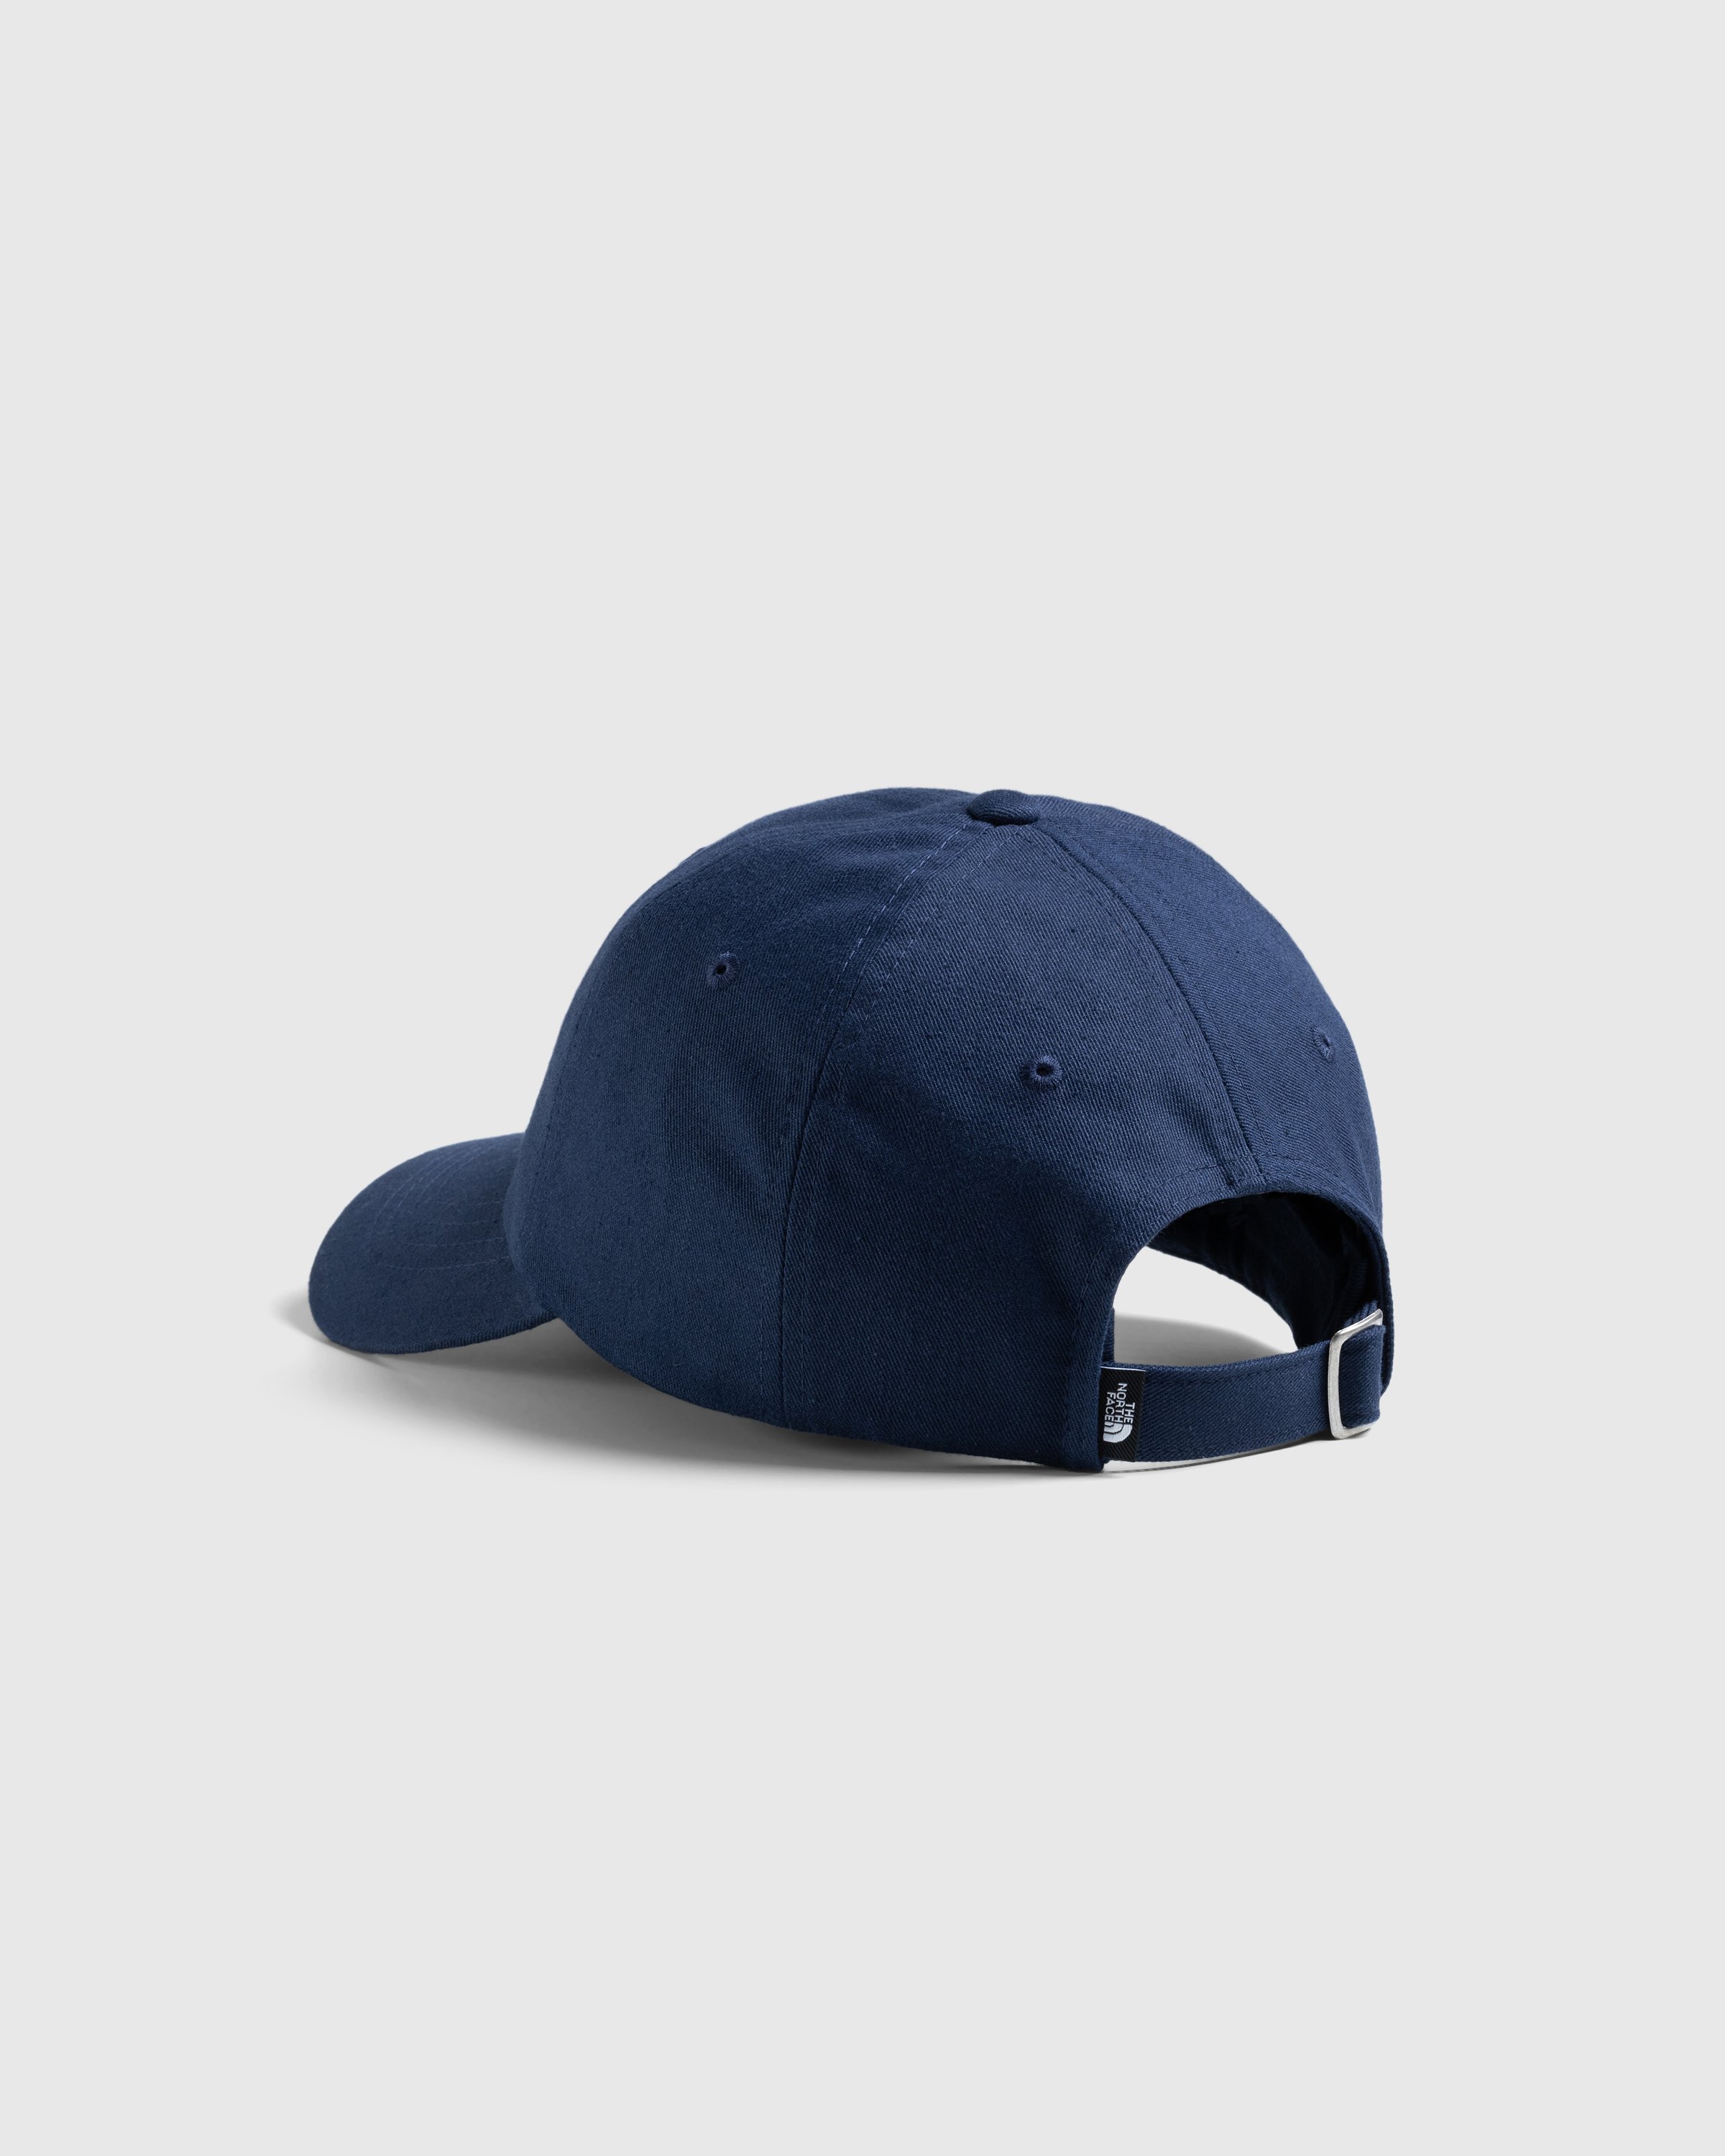 The North Face - NORM HAT SUMMIT NAVY - Accessories - Blue - Image 3